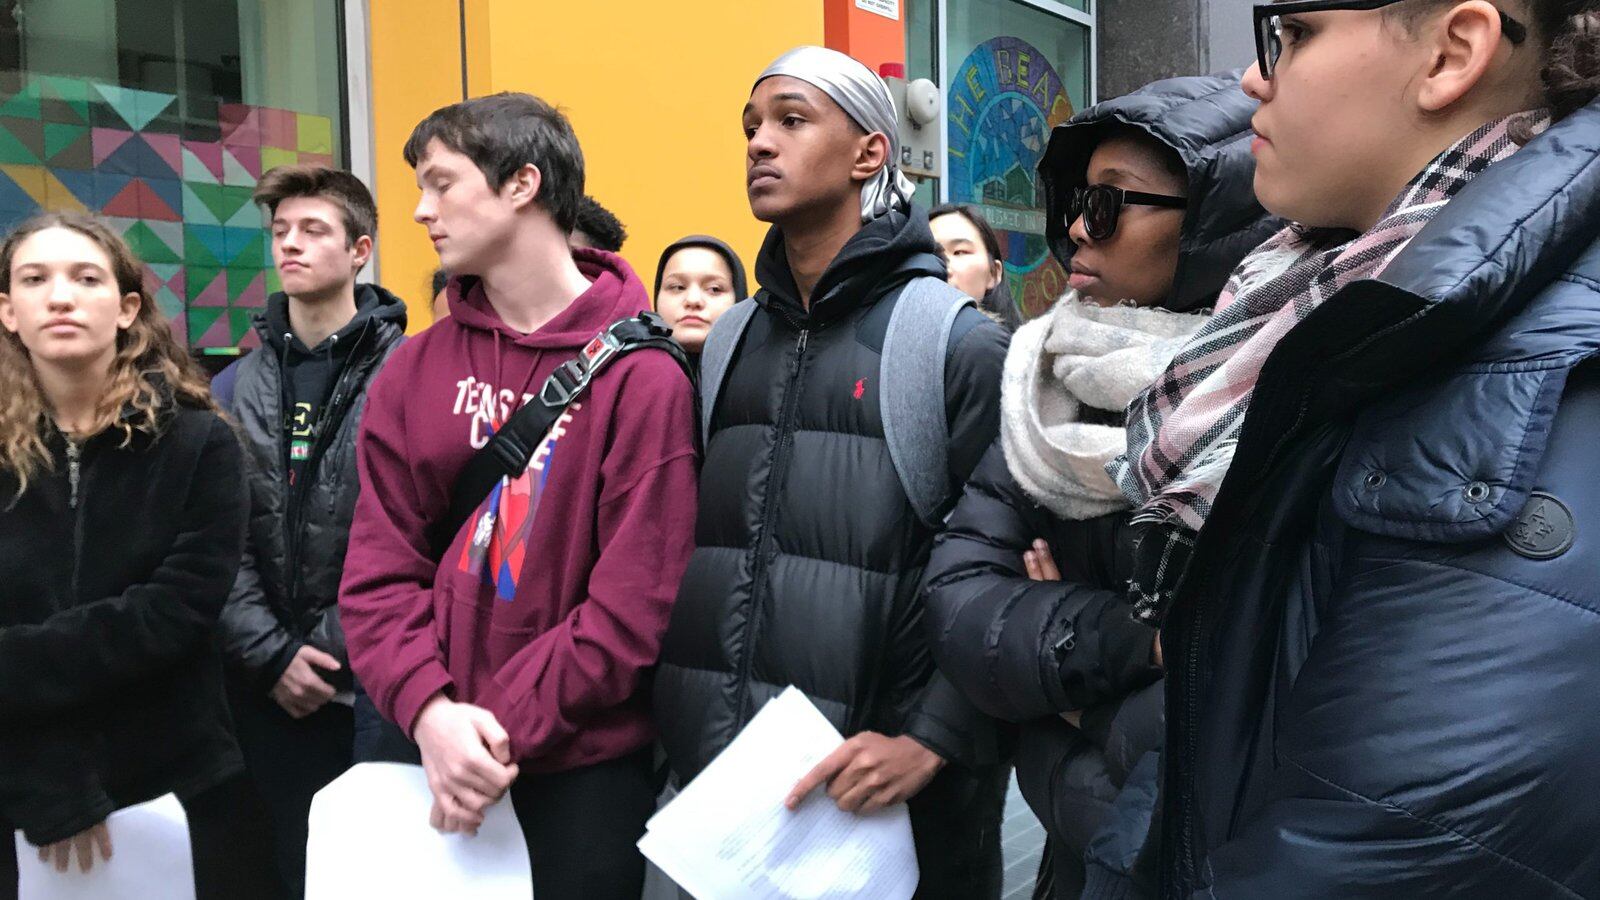 Beacon high school students discuss the sit-in they staged on Dec. 16, 2019.